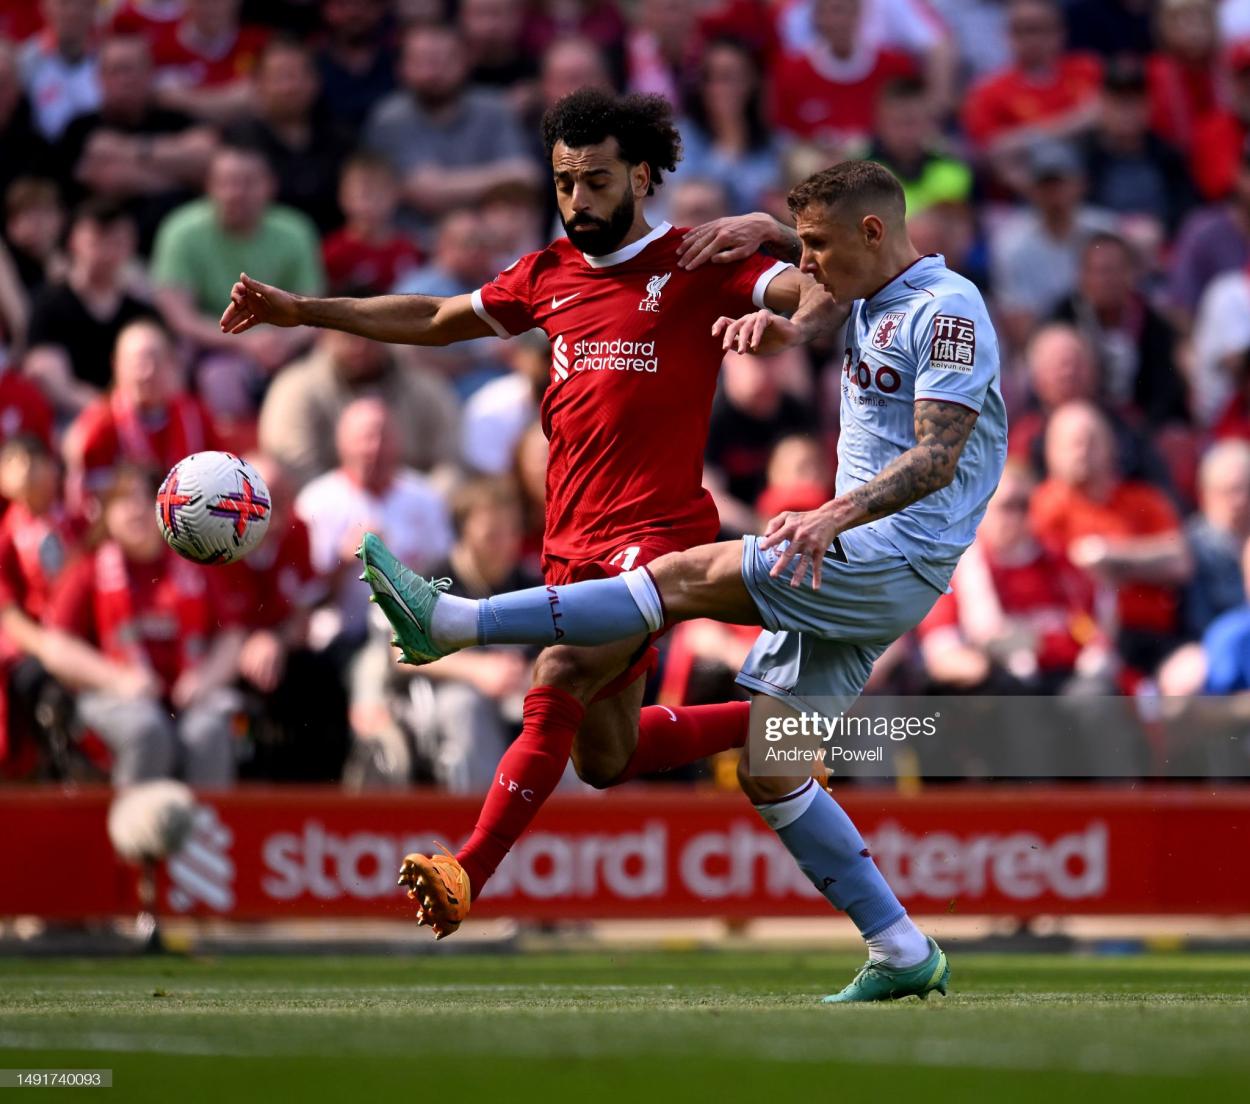 Mohamed Salah battles Lucas Digne for the ball (Image by Andrew Powell/Getty Images)